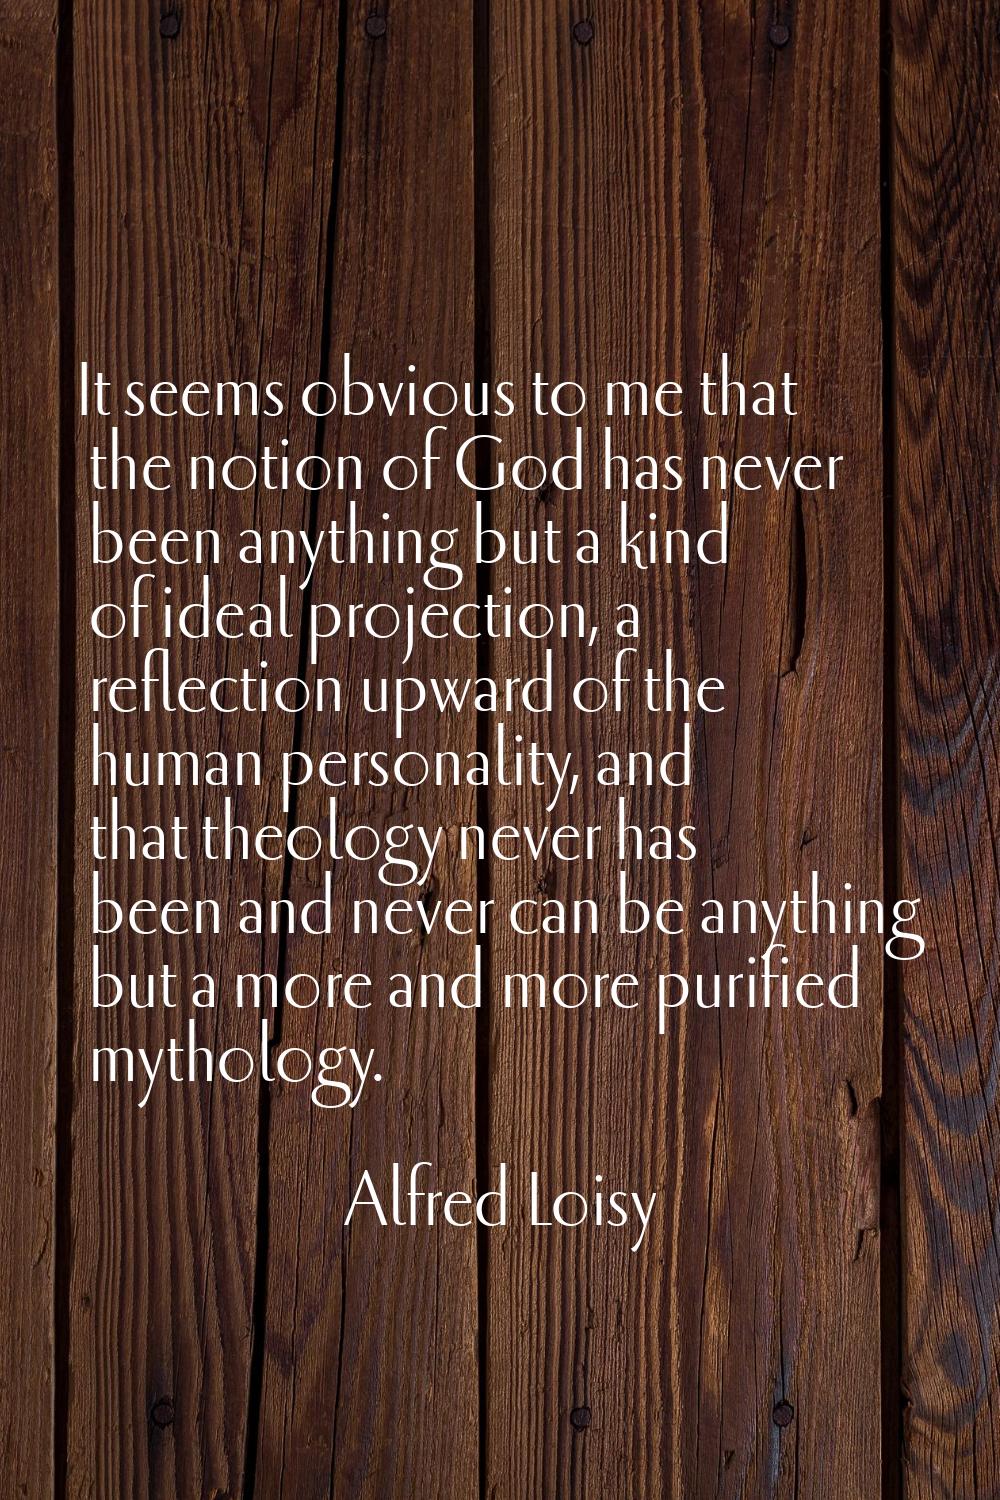 It seems obvious to me that the notion of God has never been anything but a kind of ideal projectio